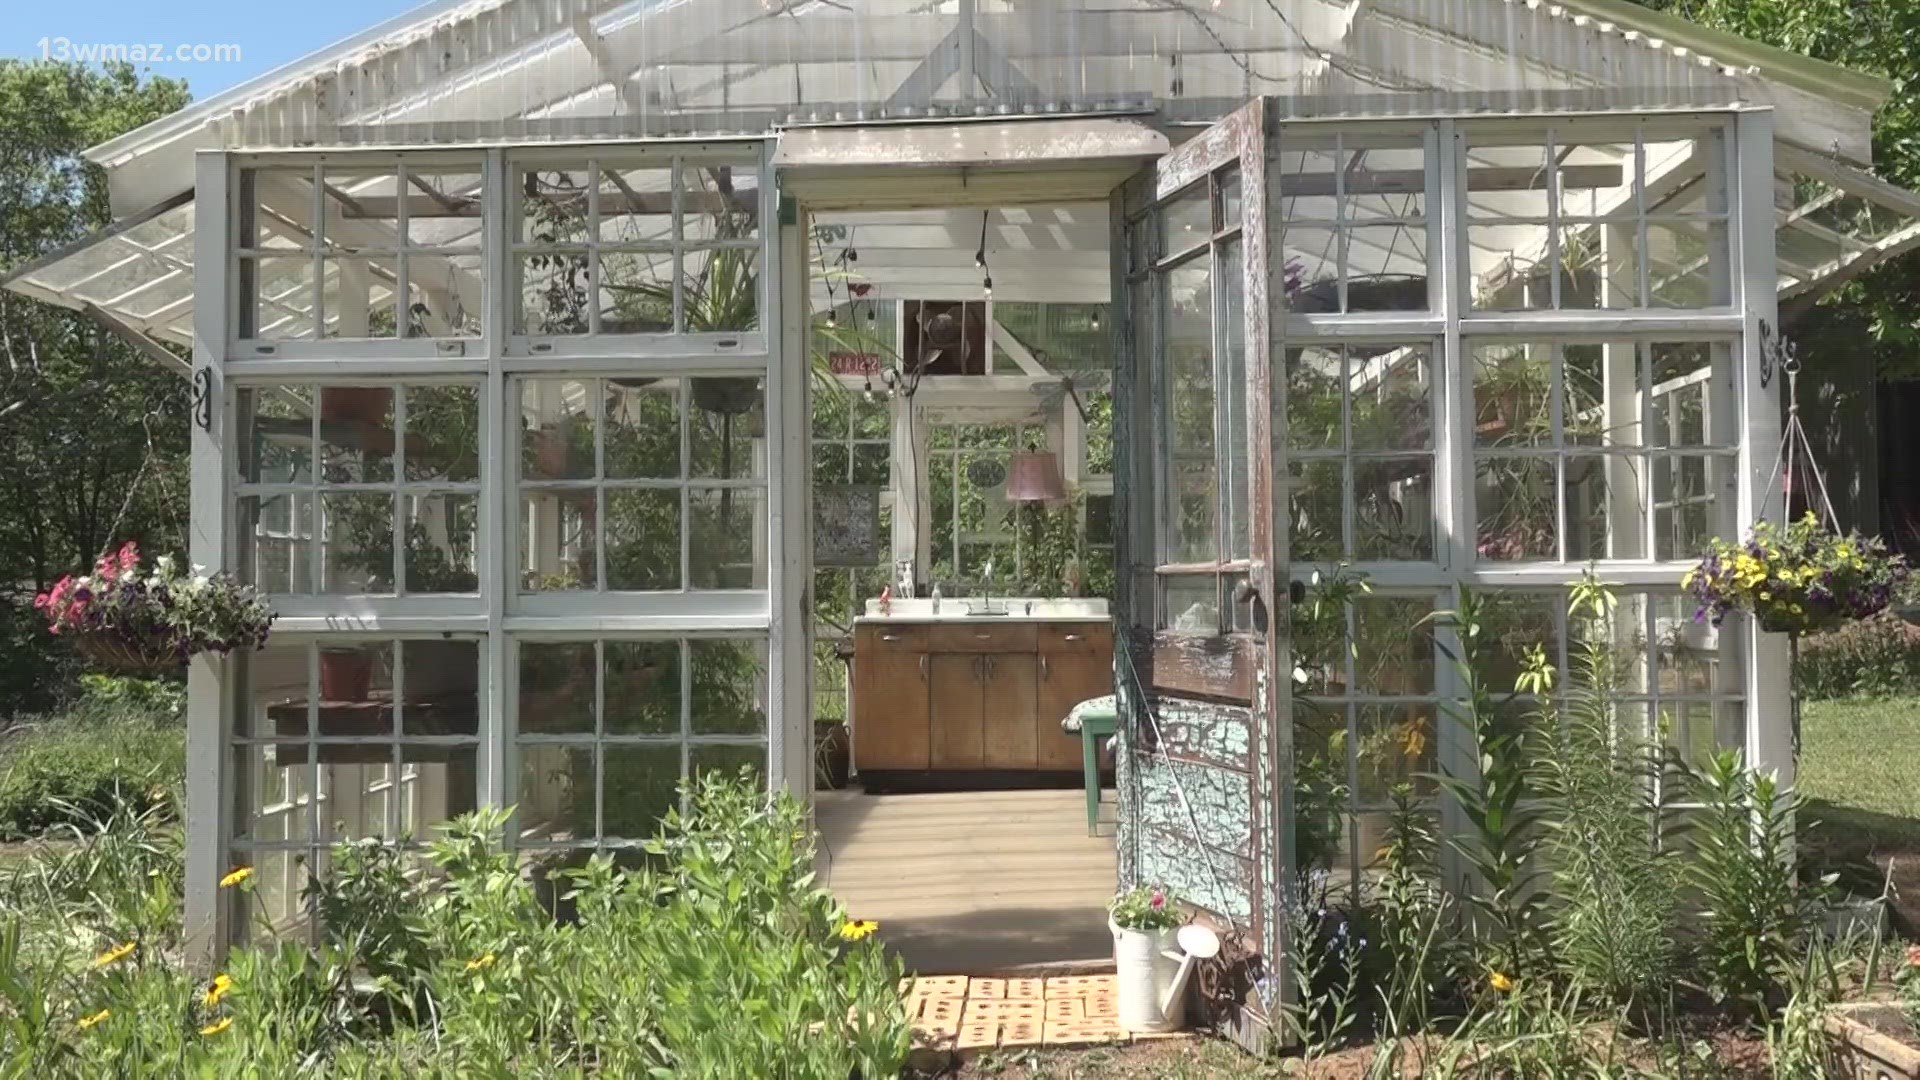 Jeff Youmans was caring for his wife, Tonya, when he decided to build a greenhouse for her.